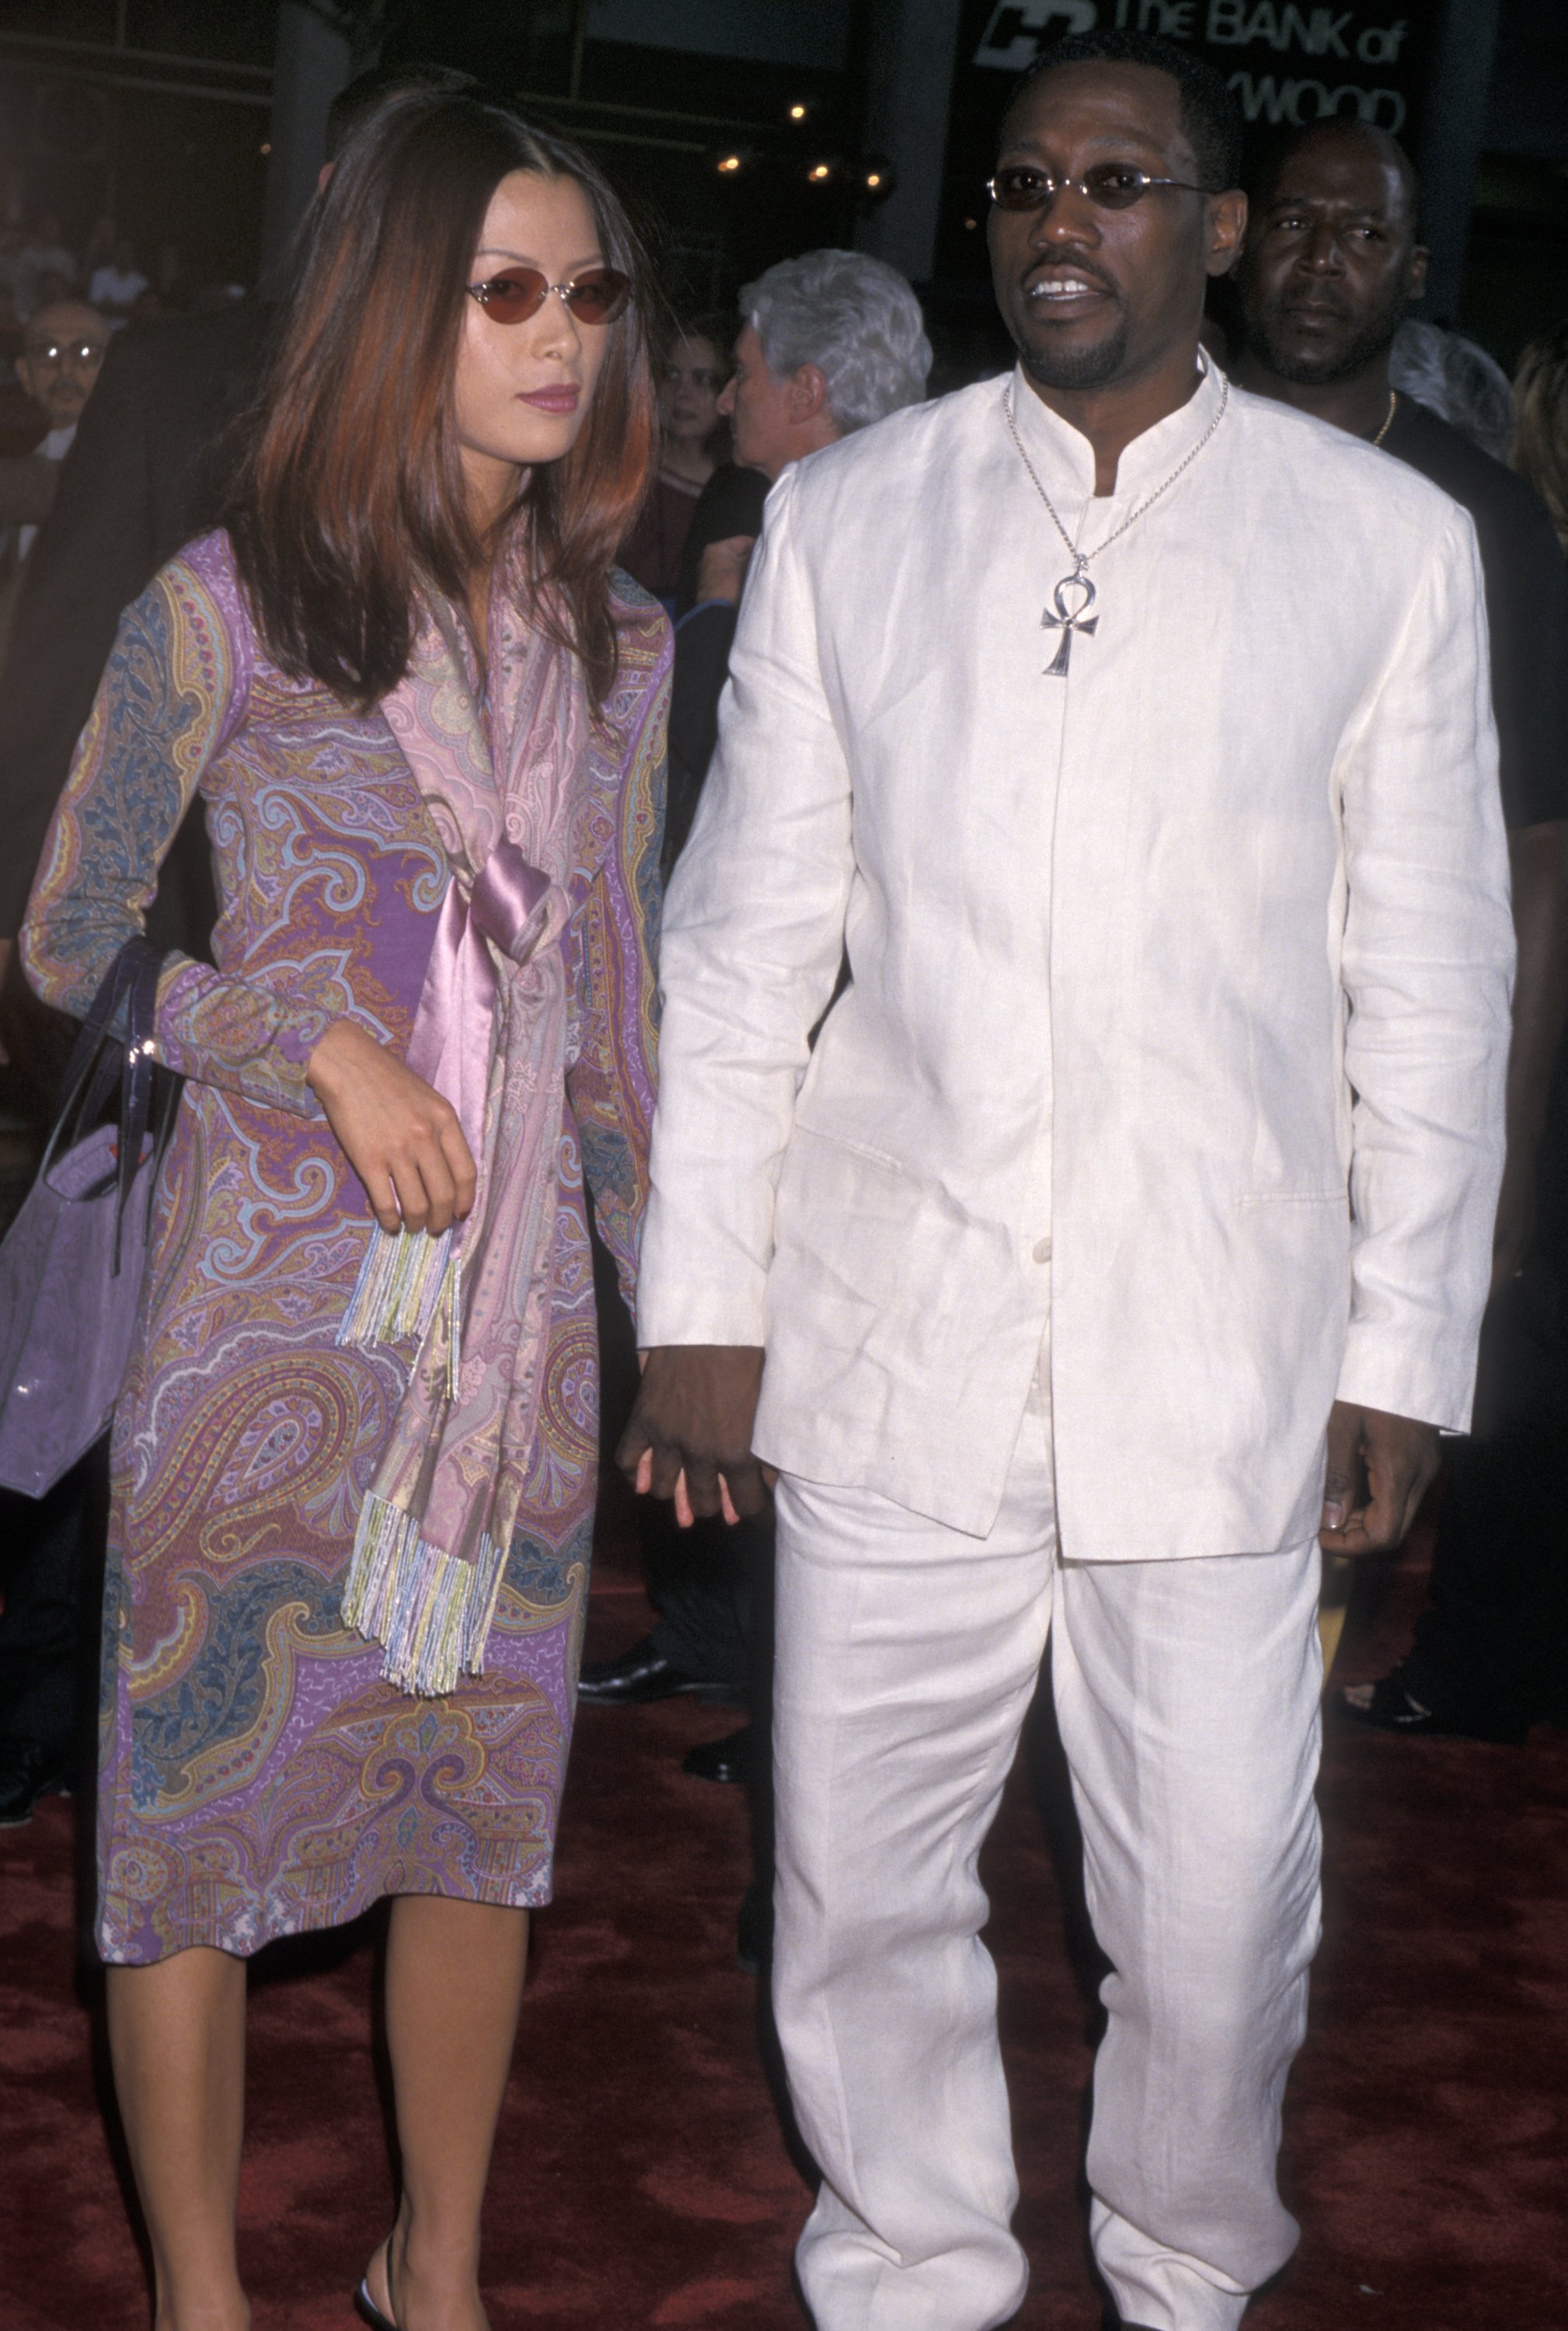 Nakyung Park and Wesley Snipes attend "The Art of War" premiere on August 23, 2000, in Hollywood, California. | Source: Getty Images